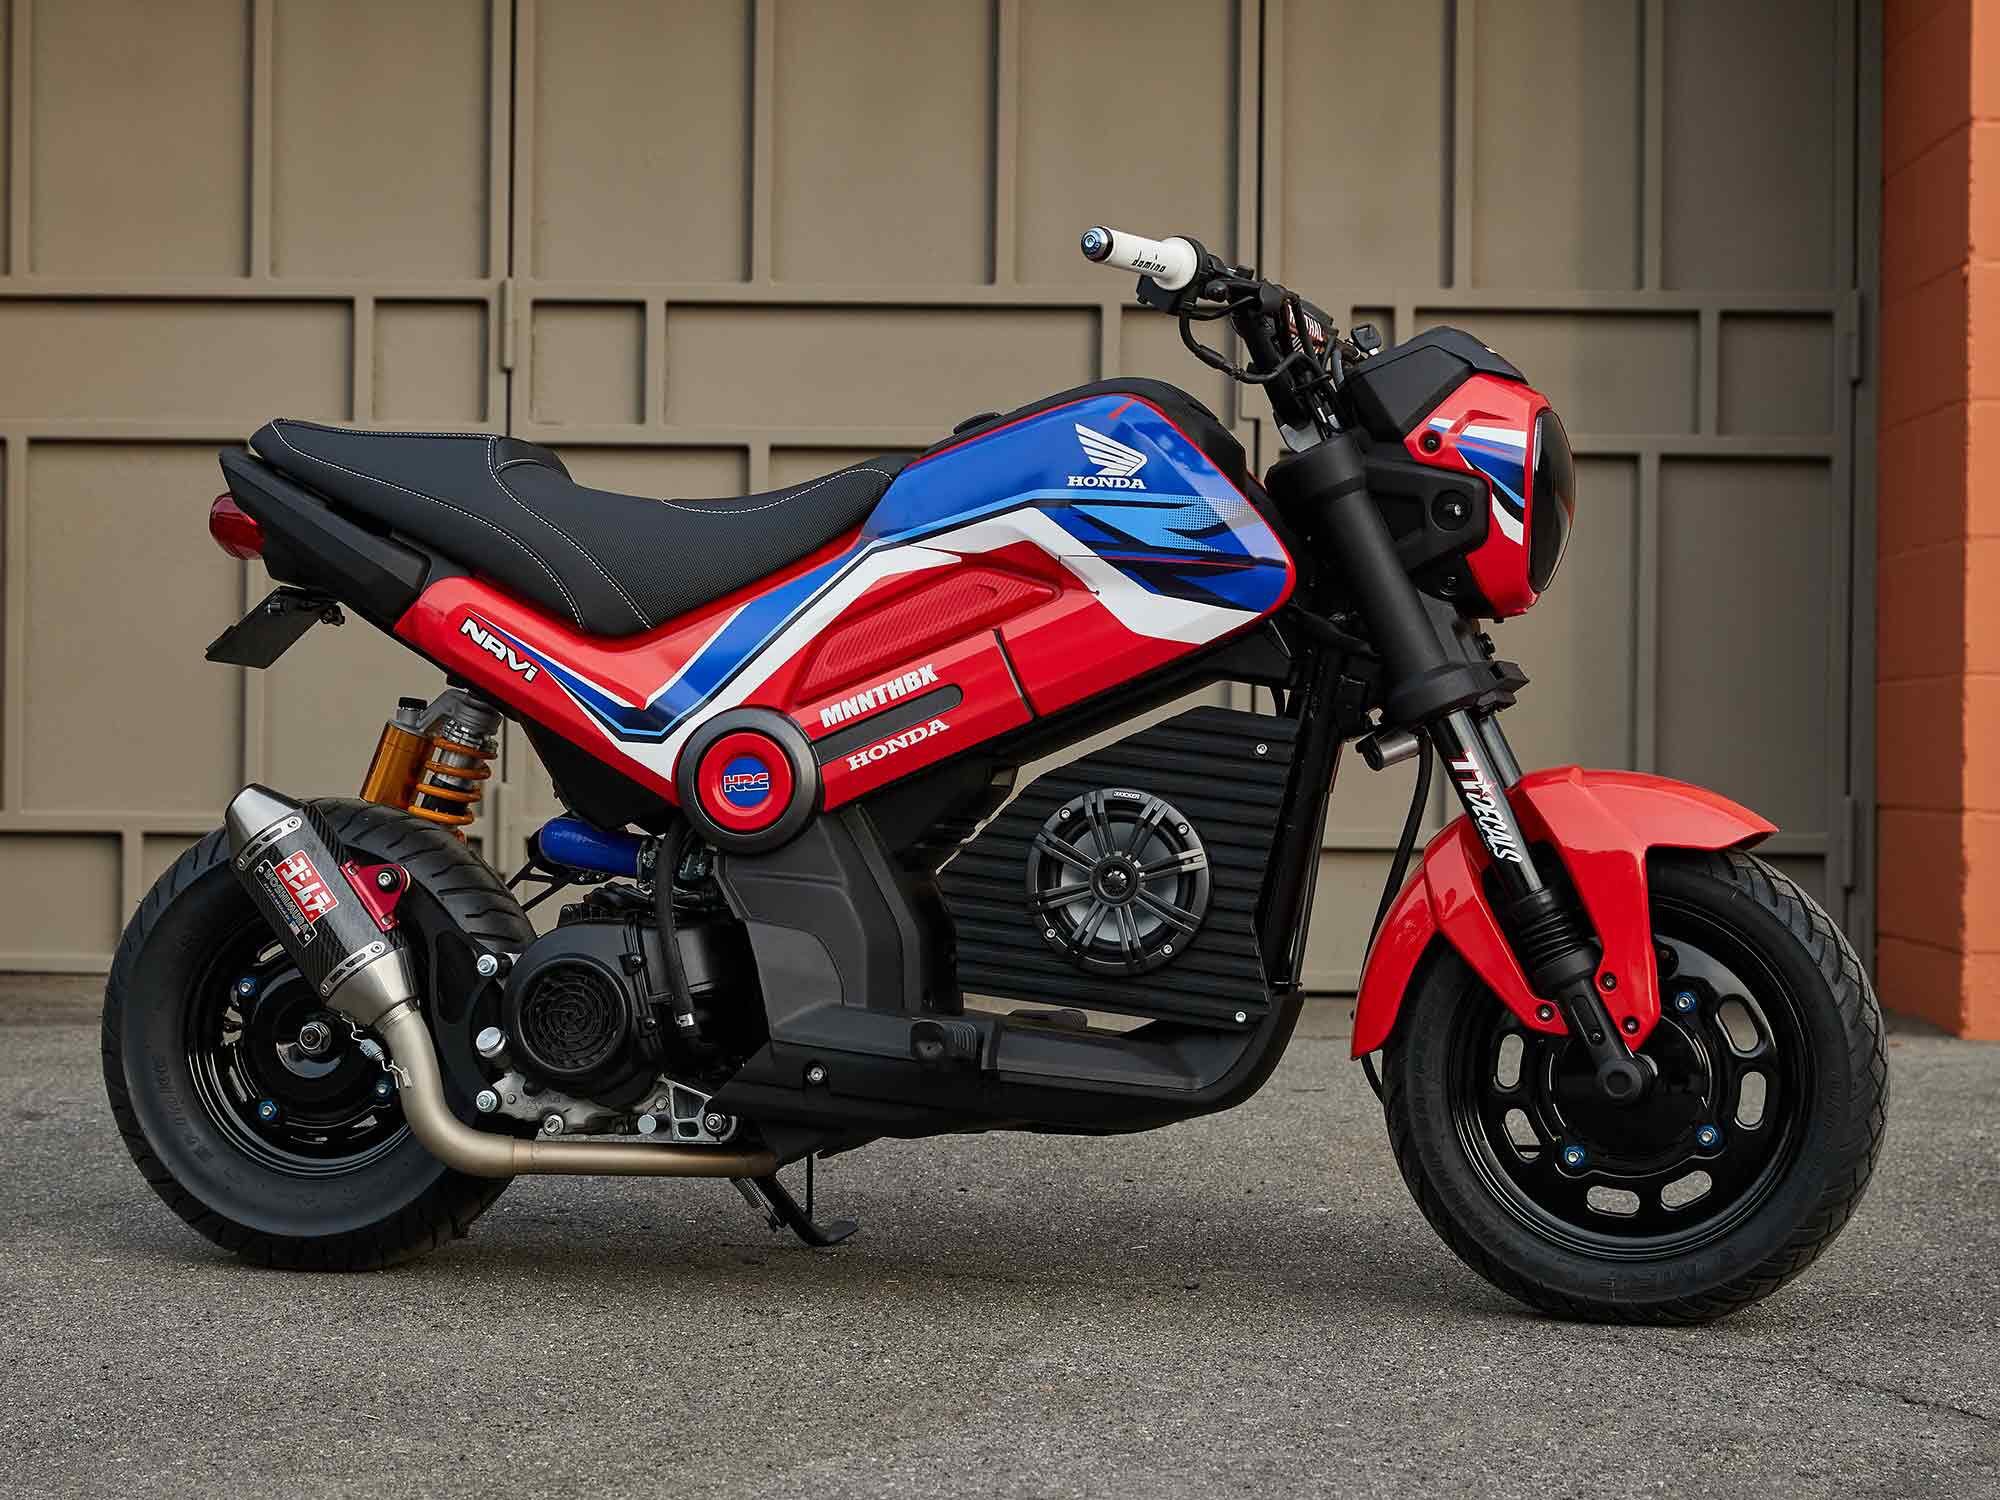 Beyond the Navi’s new-rider intended audience, Honda is hoping that it will also inspire a cult following similar to the Grom and Ruckus. This customized version from Tennessee’s MNNTHBX features the usual trick aftermarket components, plus the storage bin has been converted to a music speaker system.